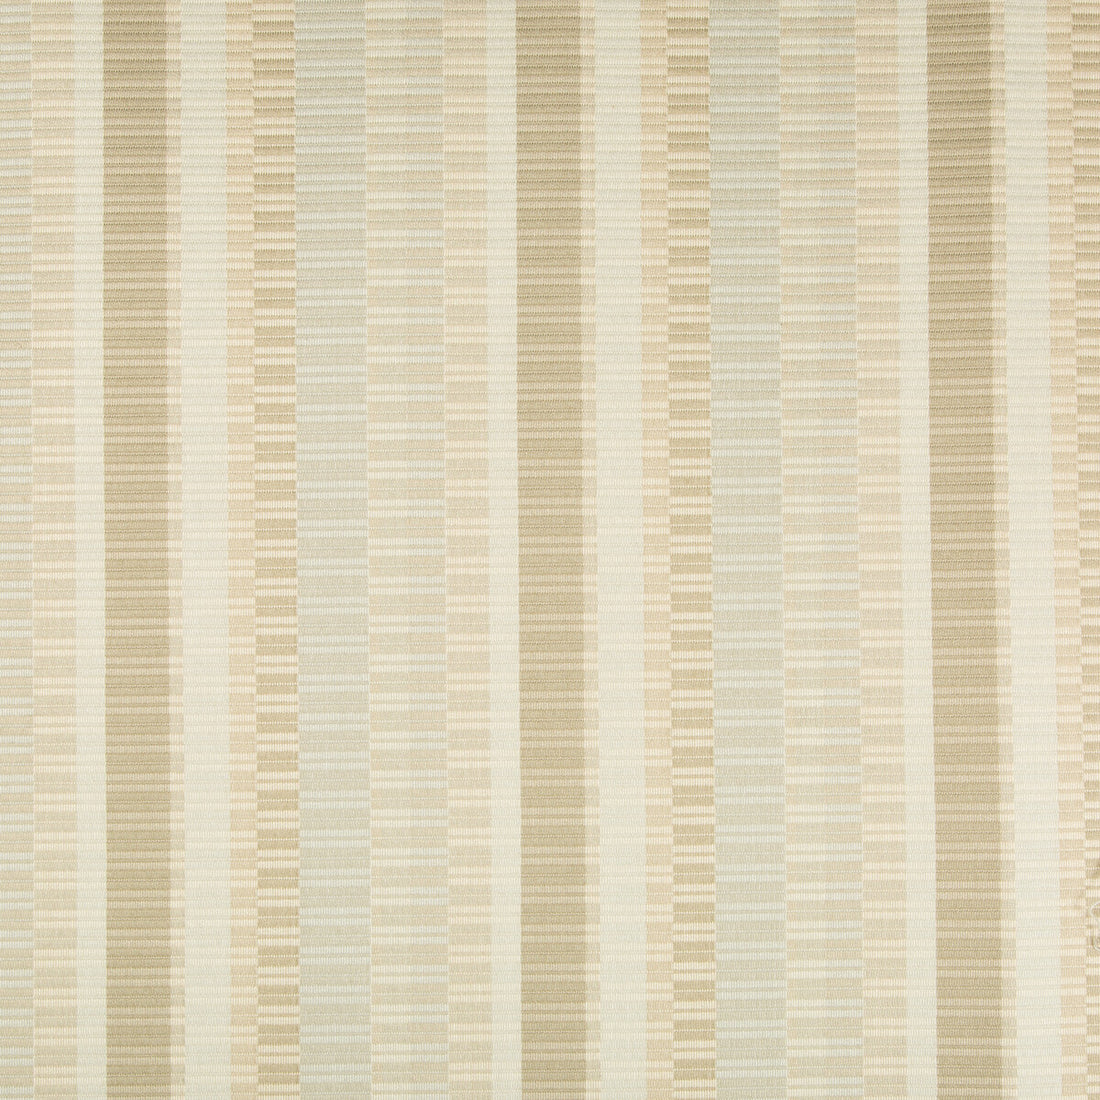 Kravet Contract fabric in 35037-16 color - pattern 35037.16.0 - by Kravet Contract in the Incase Crypton Gis collection